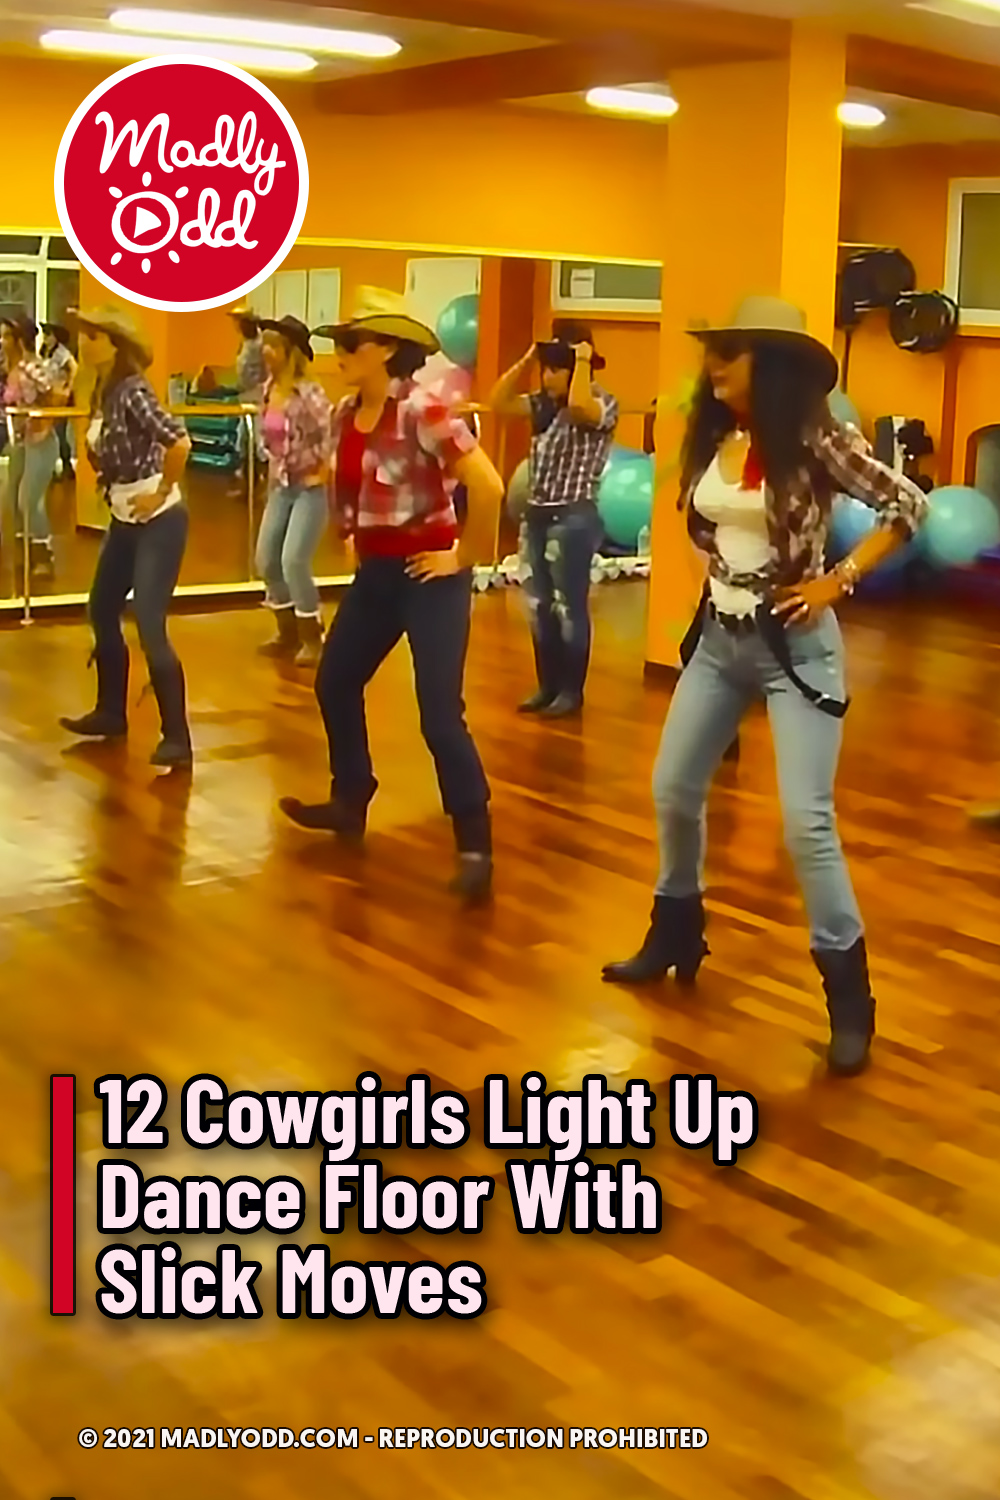 12 Cowgirls Light Up Dance Floor With Slick Moves